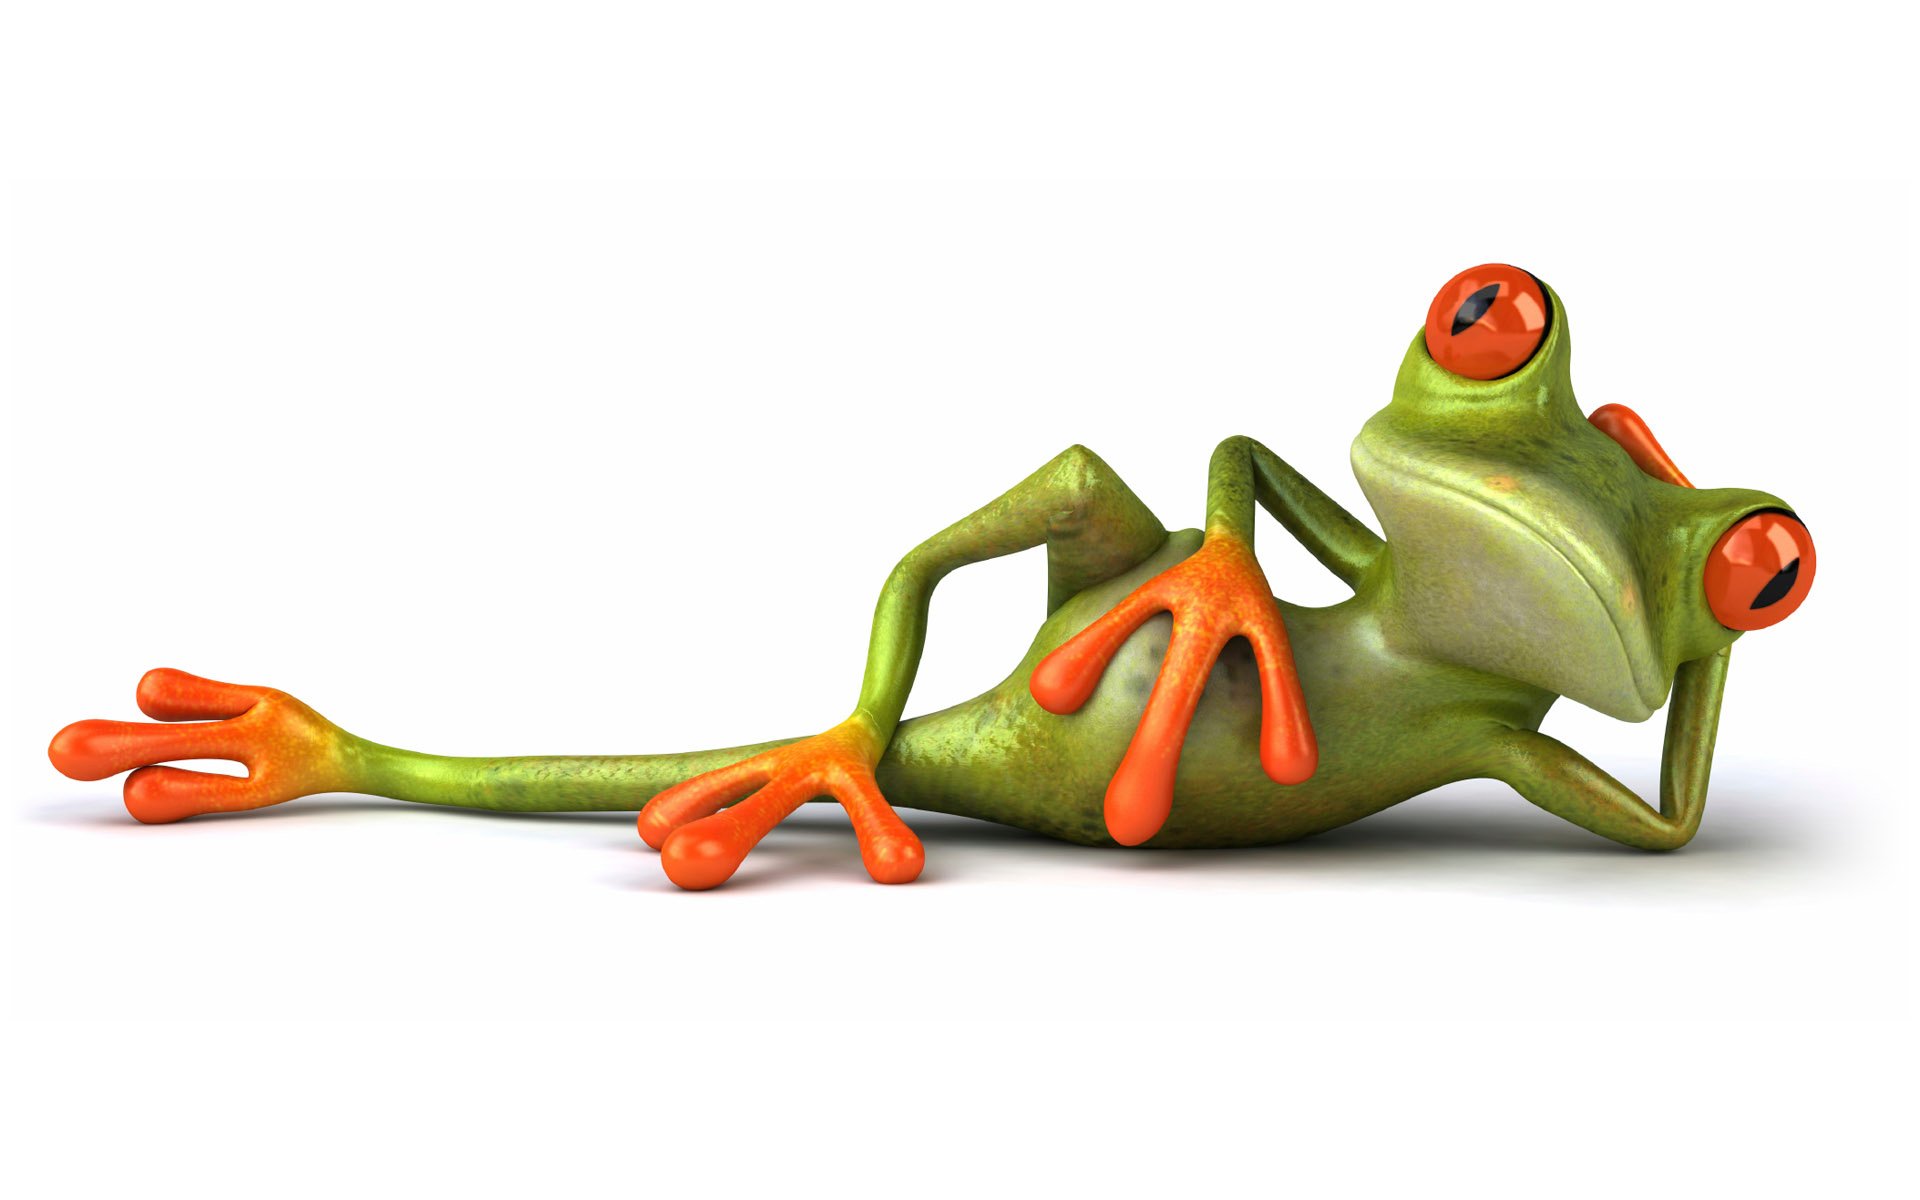 frog 3d wallpaper for desktop is a great wallpaper for your computer 1920x1200